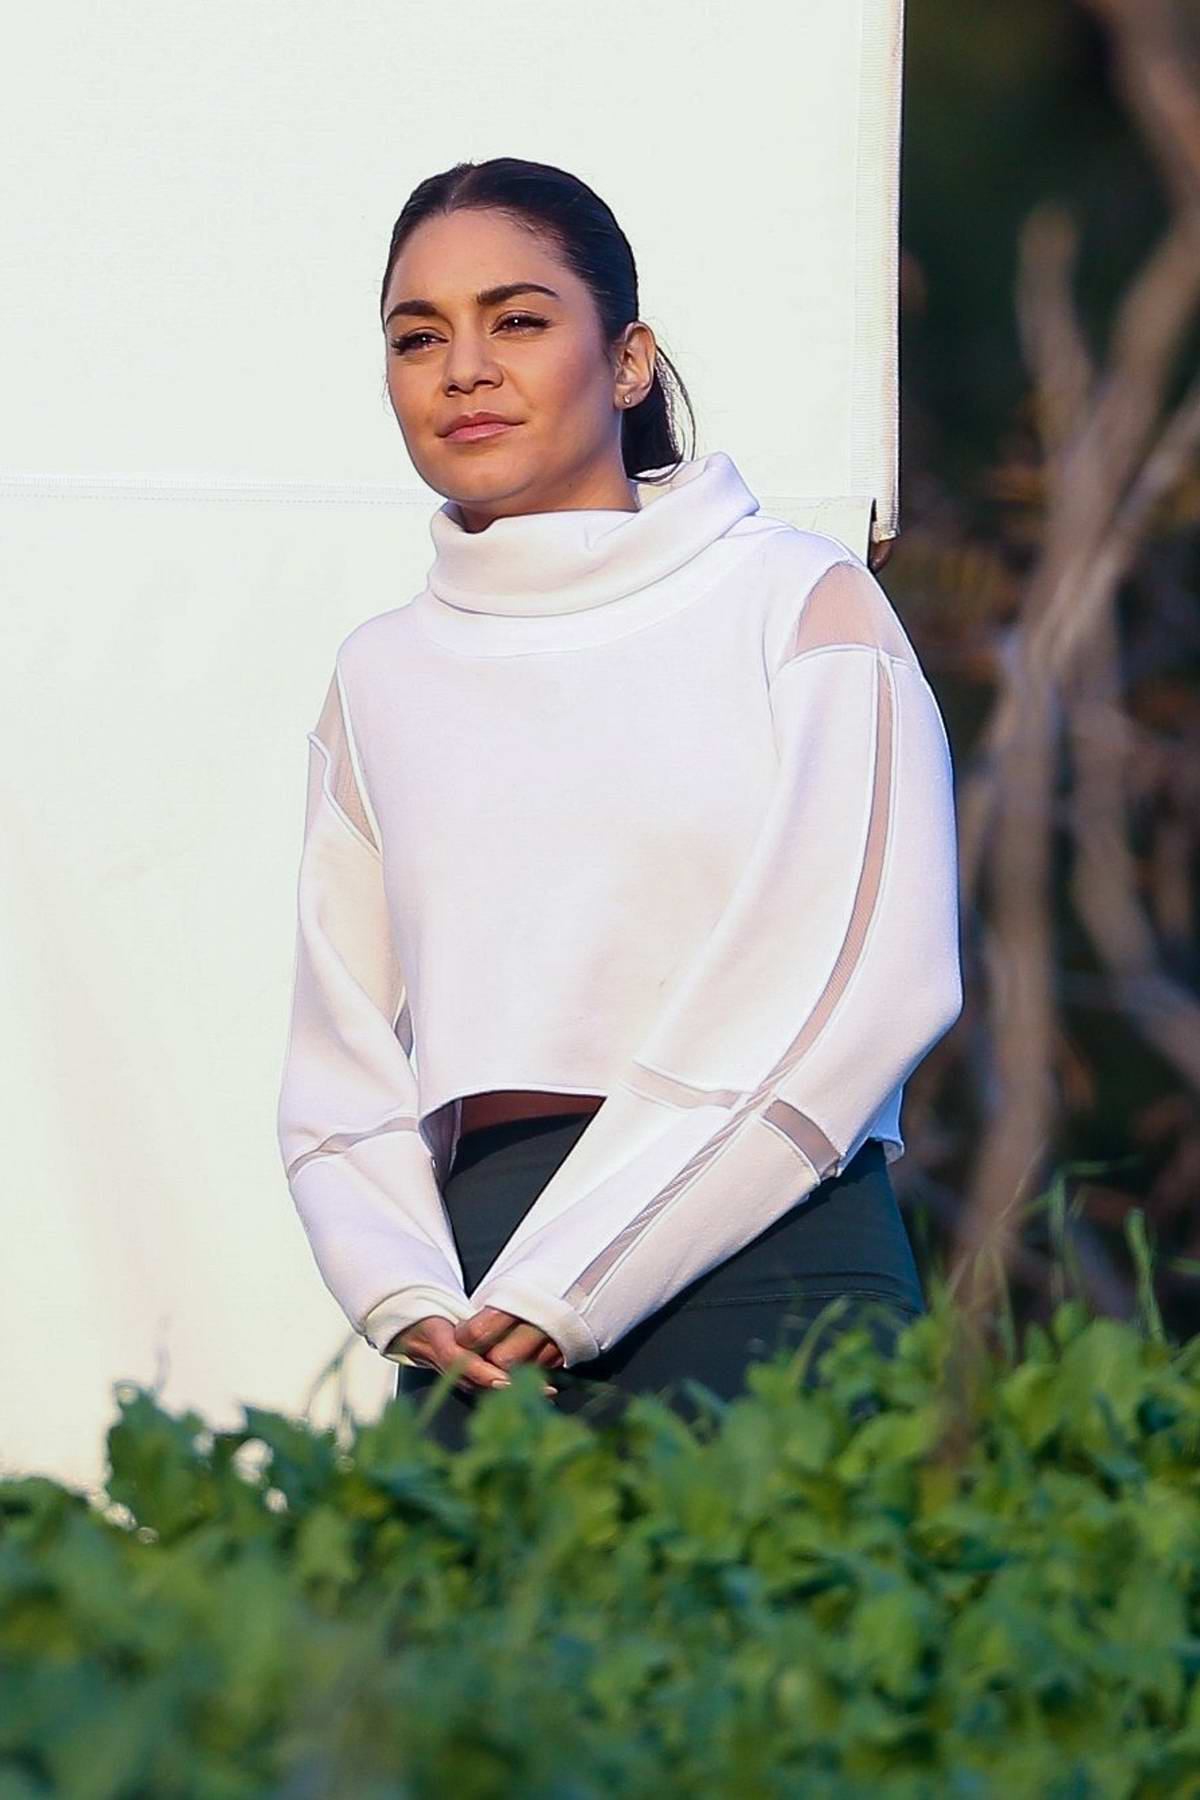 https://www.celebsfirst.com/wp-content/uploads/2020/01/vanessa-hudgens-seen-filming-a-sportswear-ad-for-her-avia-activewear-collection-in-los-angeles-160120_4.jpg